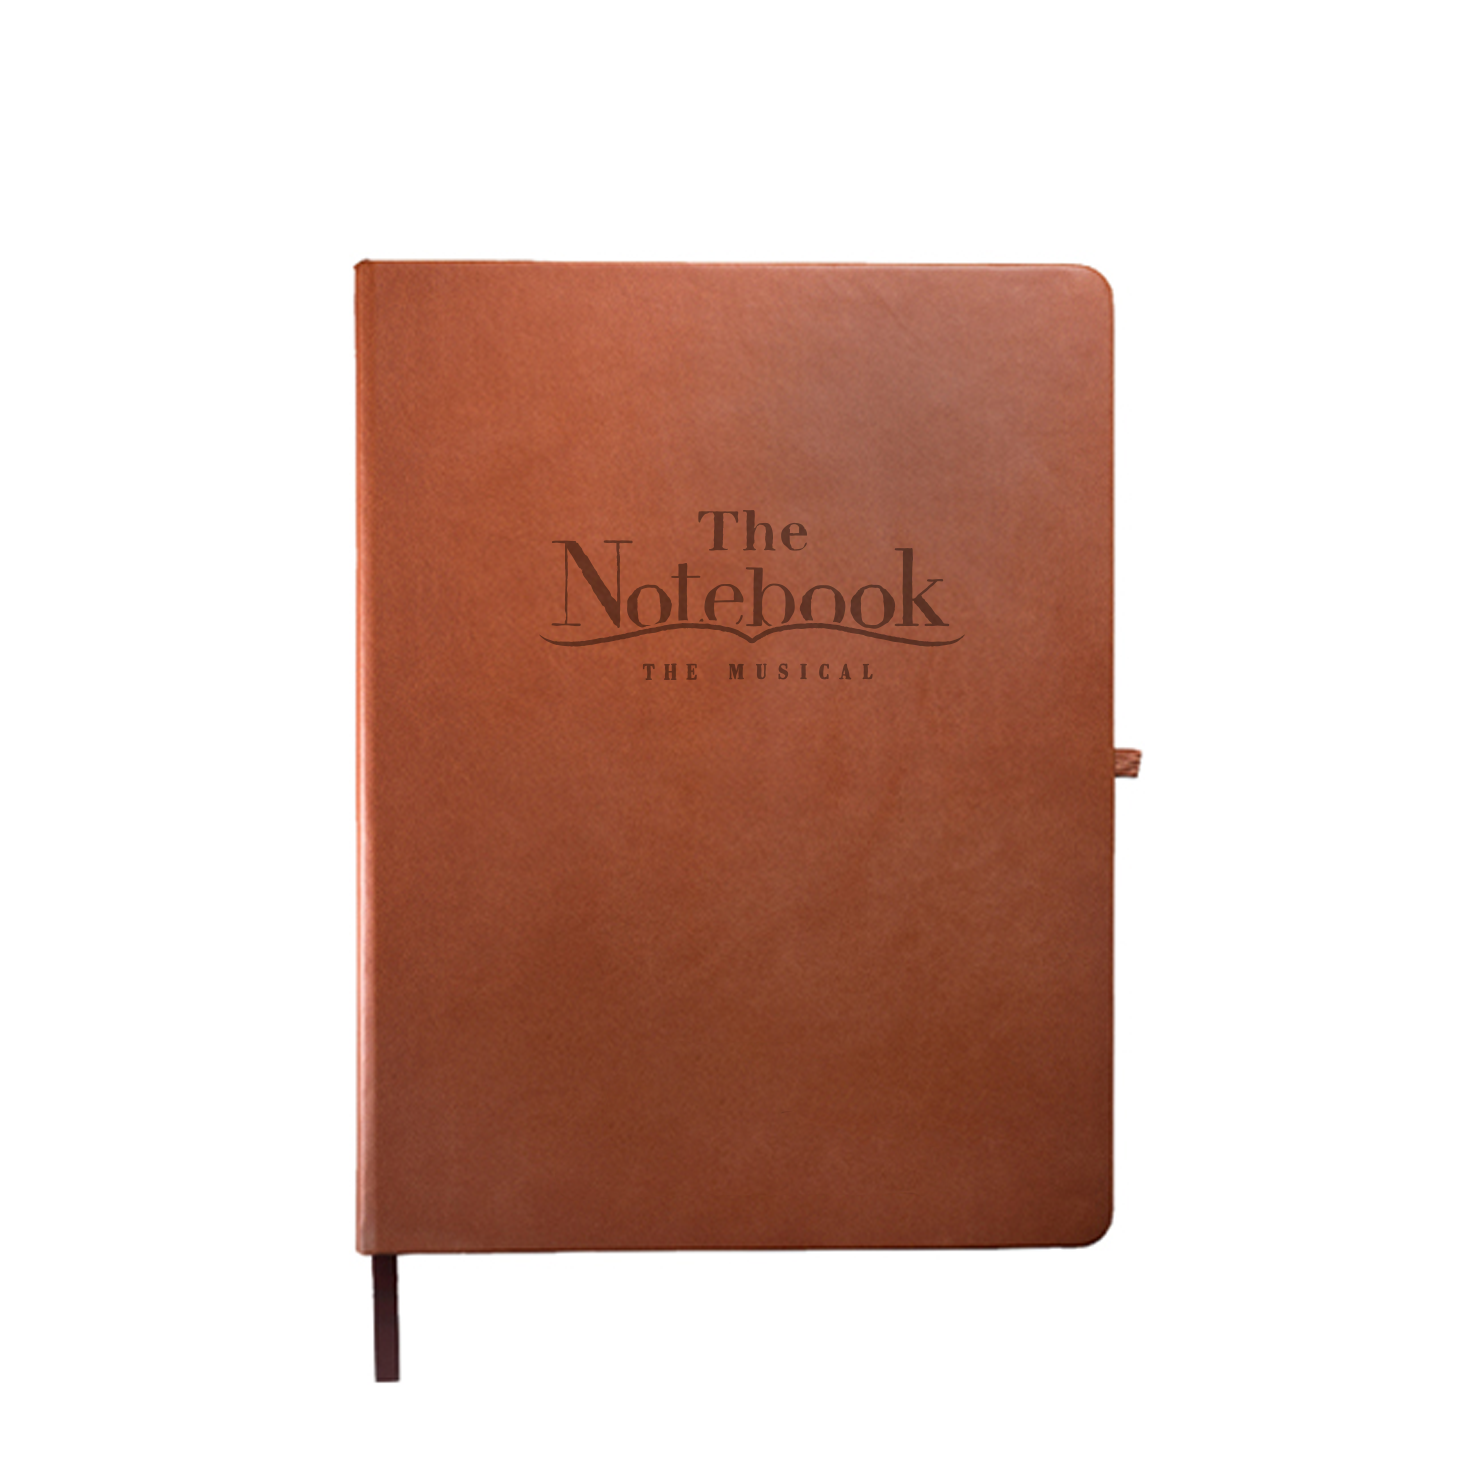 THE NOTEBOOK Leather Notebook Image